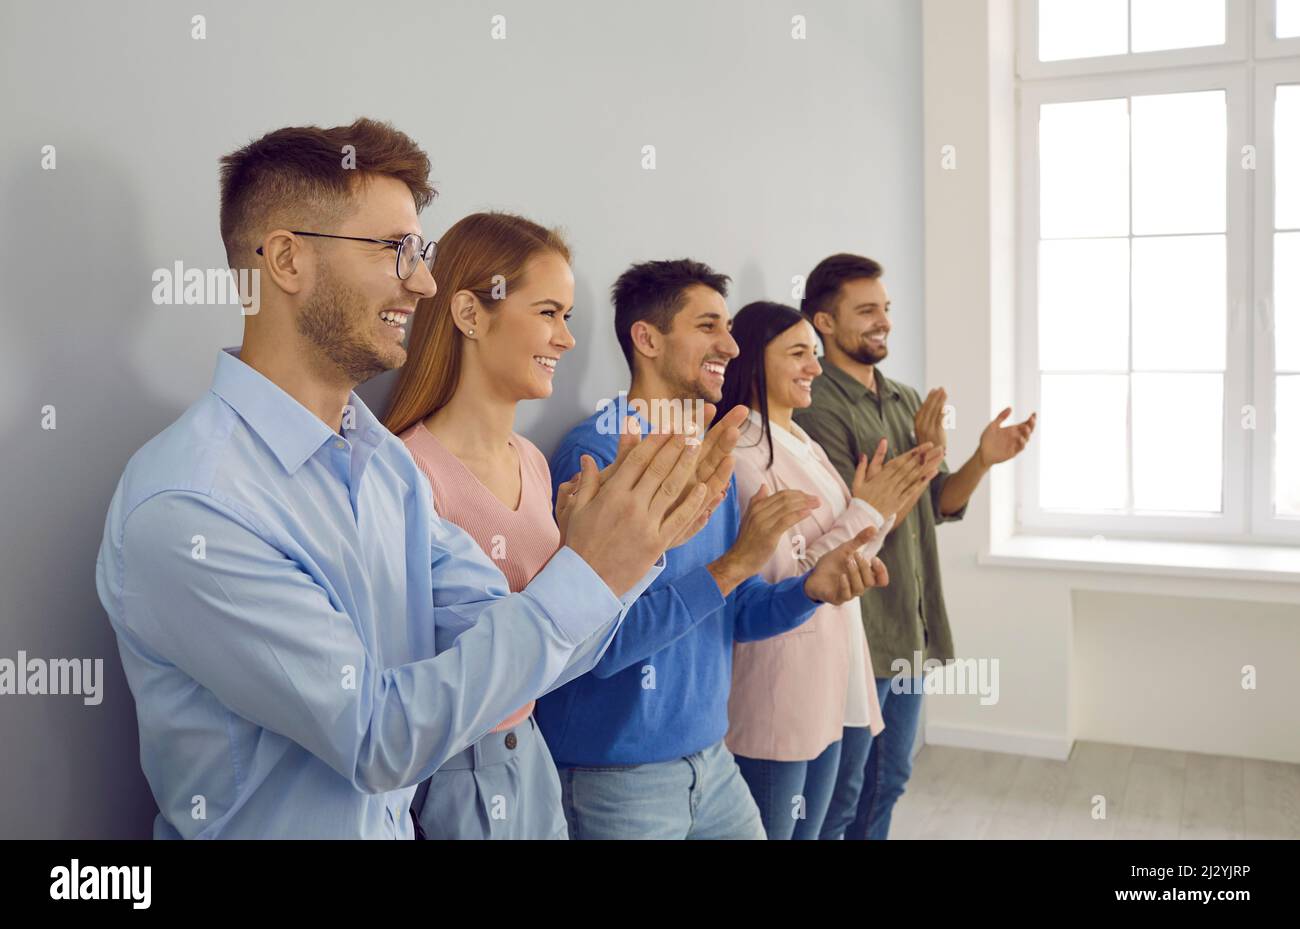 Happy businesspeople clap hands show appreciation Stock Photo